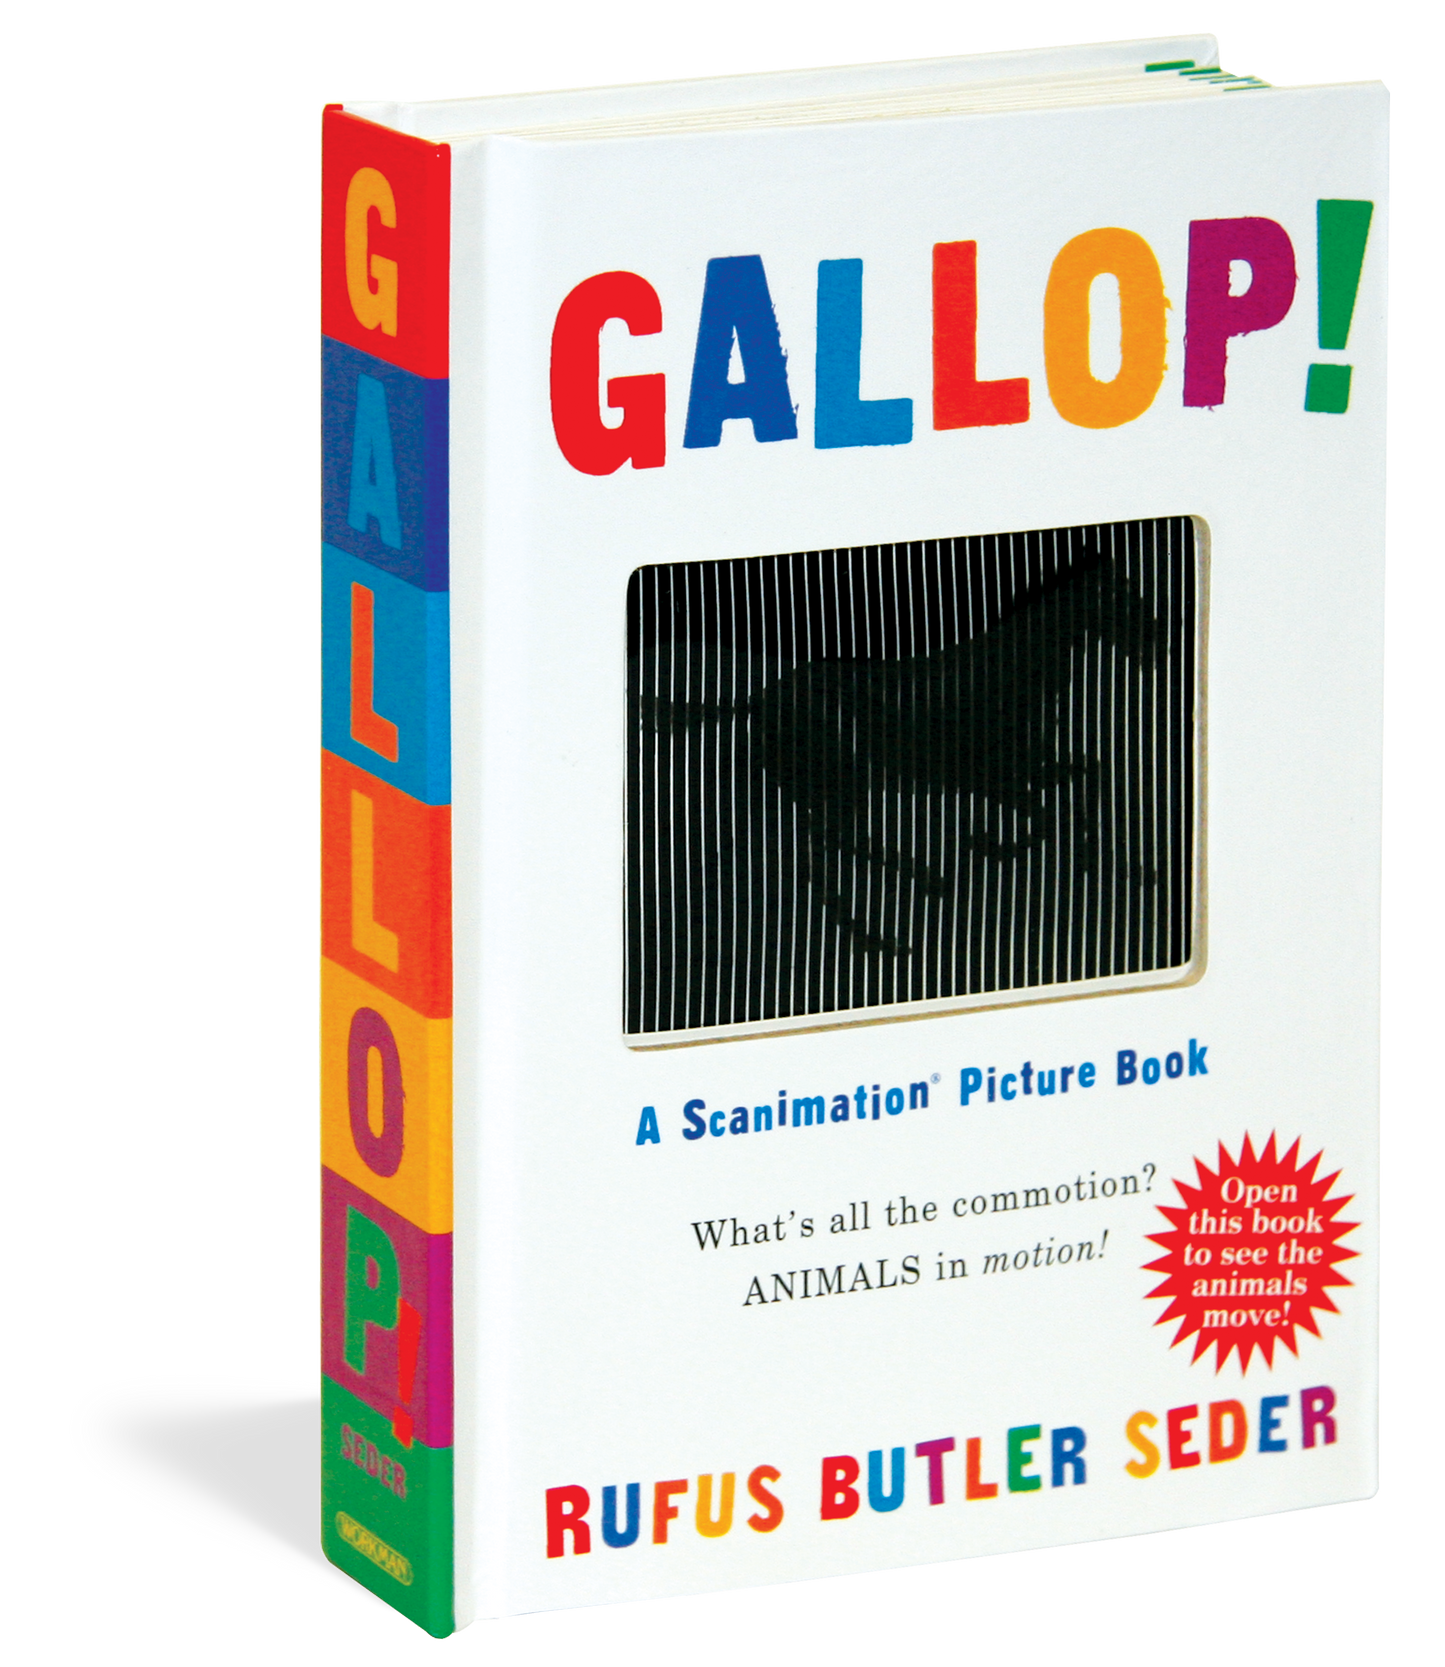 Gallop! A Scanimation Picture Book